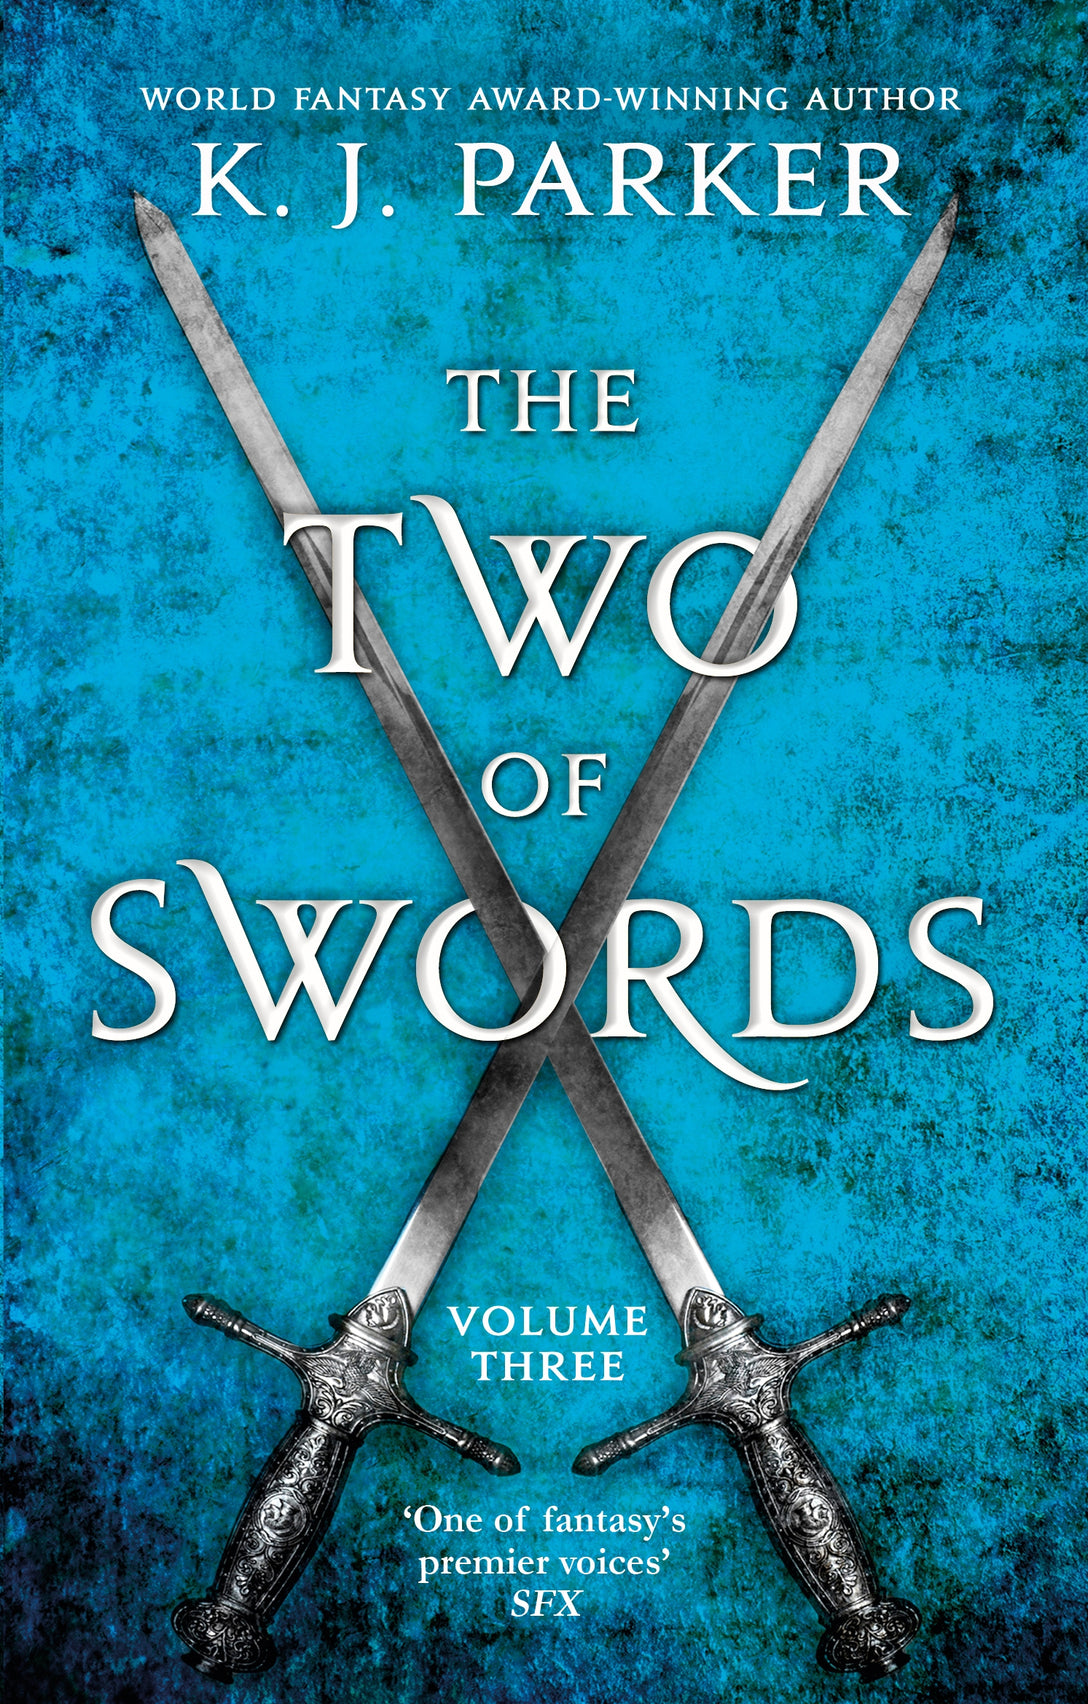 The Two of Swords: Volume Three by K. J. Parker